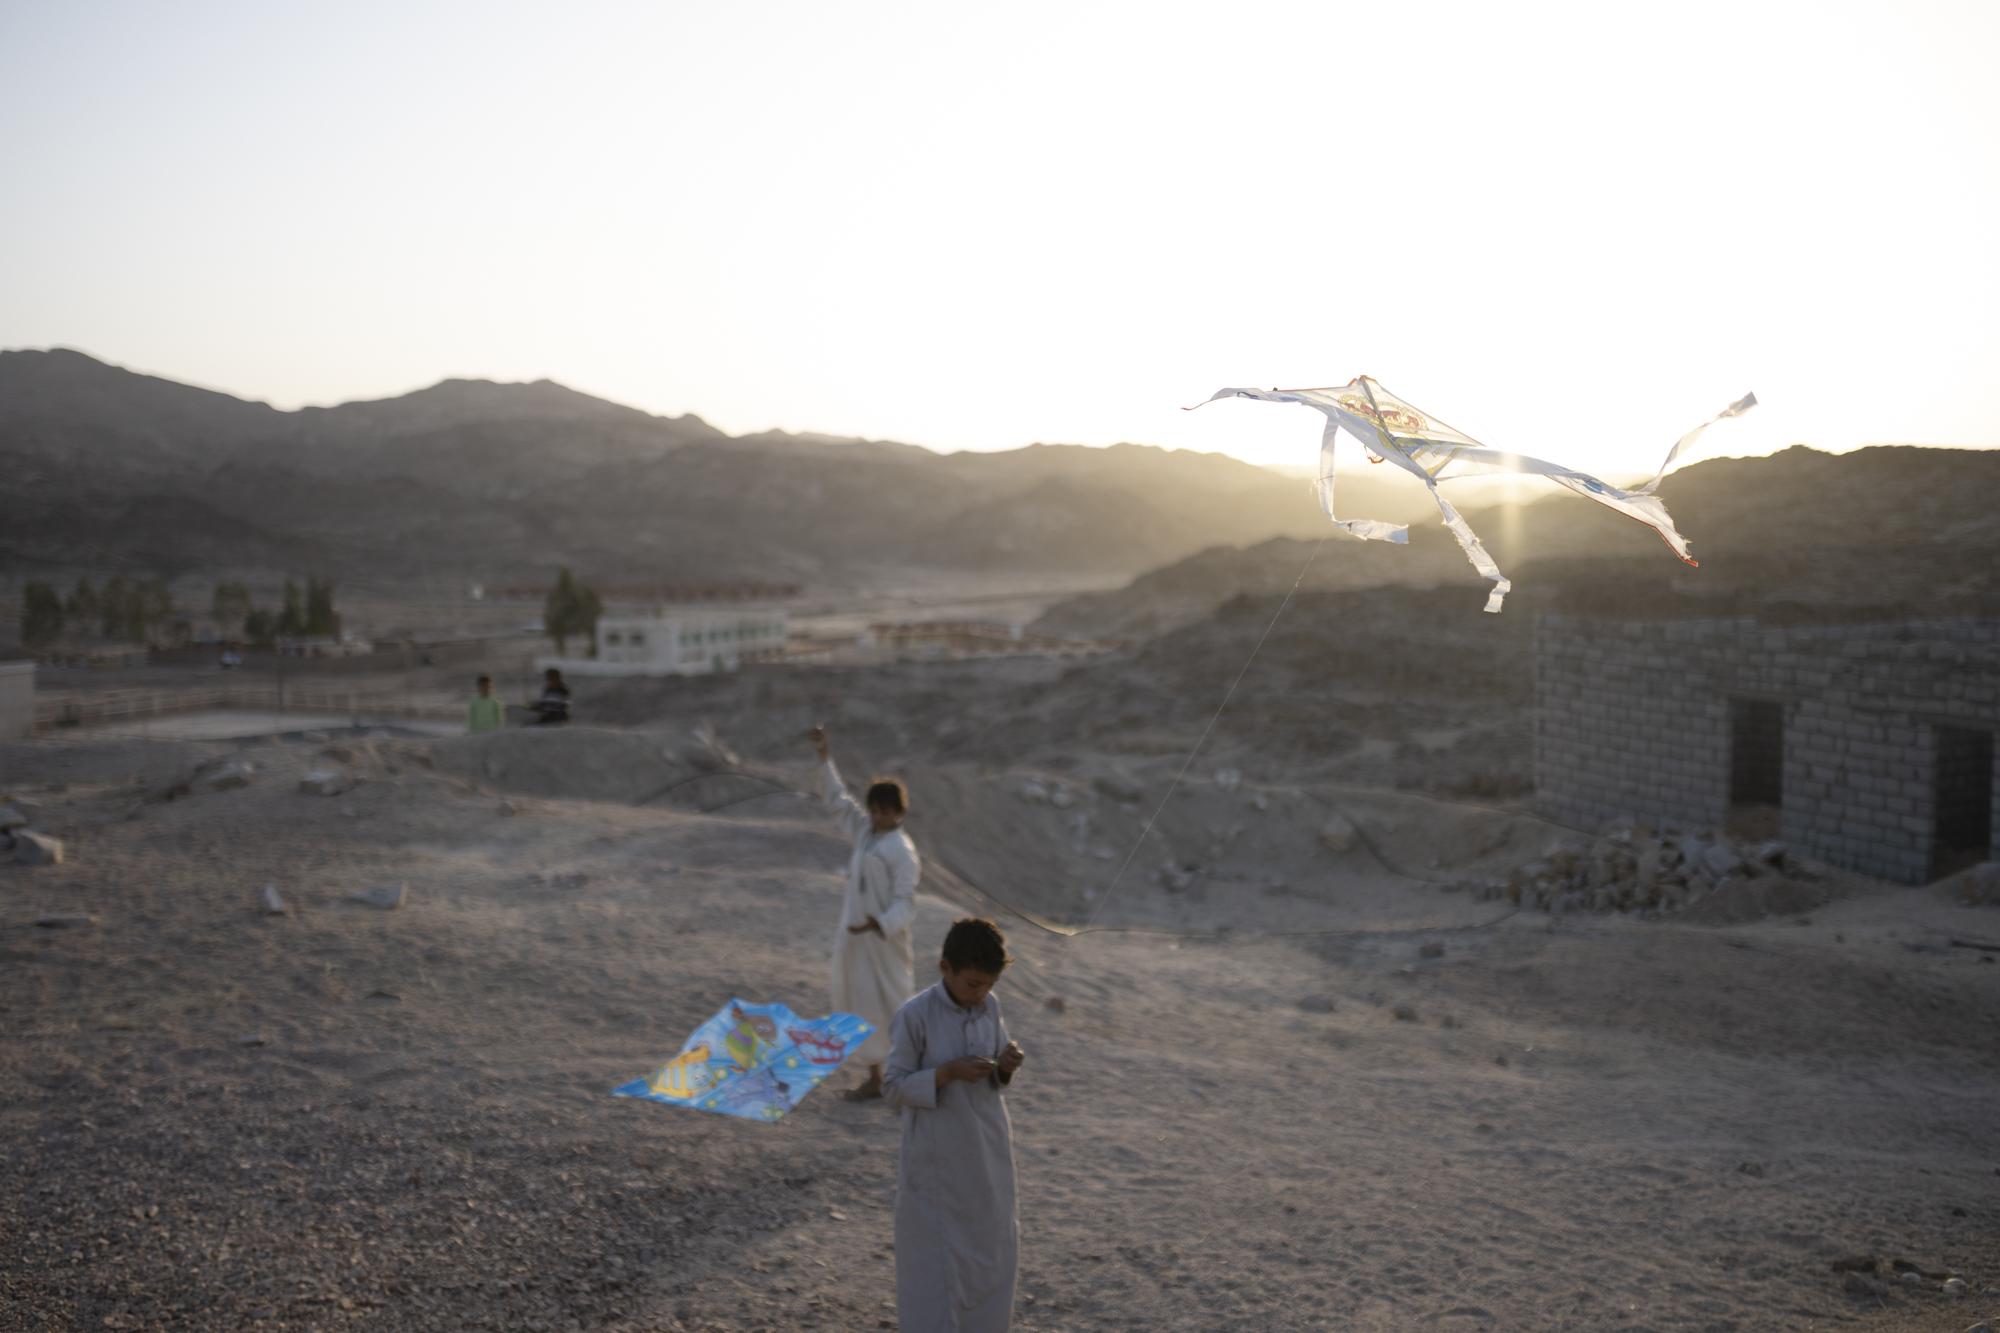 On National Geographic: In one of Egypt's most spiritual places, Bedouins find peace and resilience - Children fly kites on a hill looking over Al Tarfa Village in the Sinai Peninsula, Egypt in April...